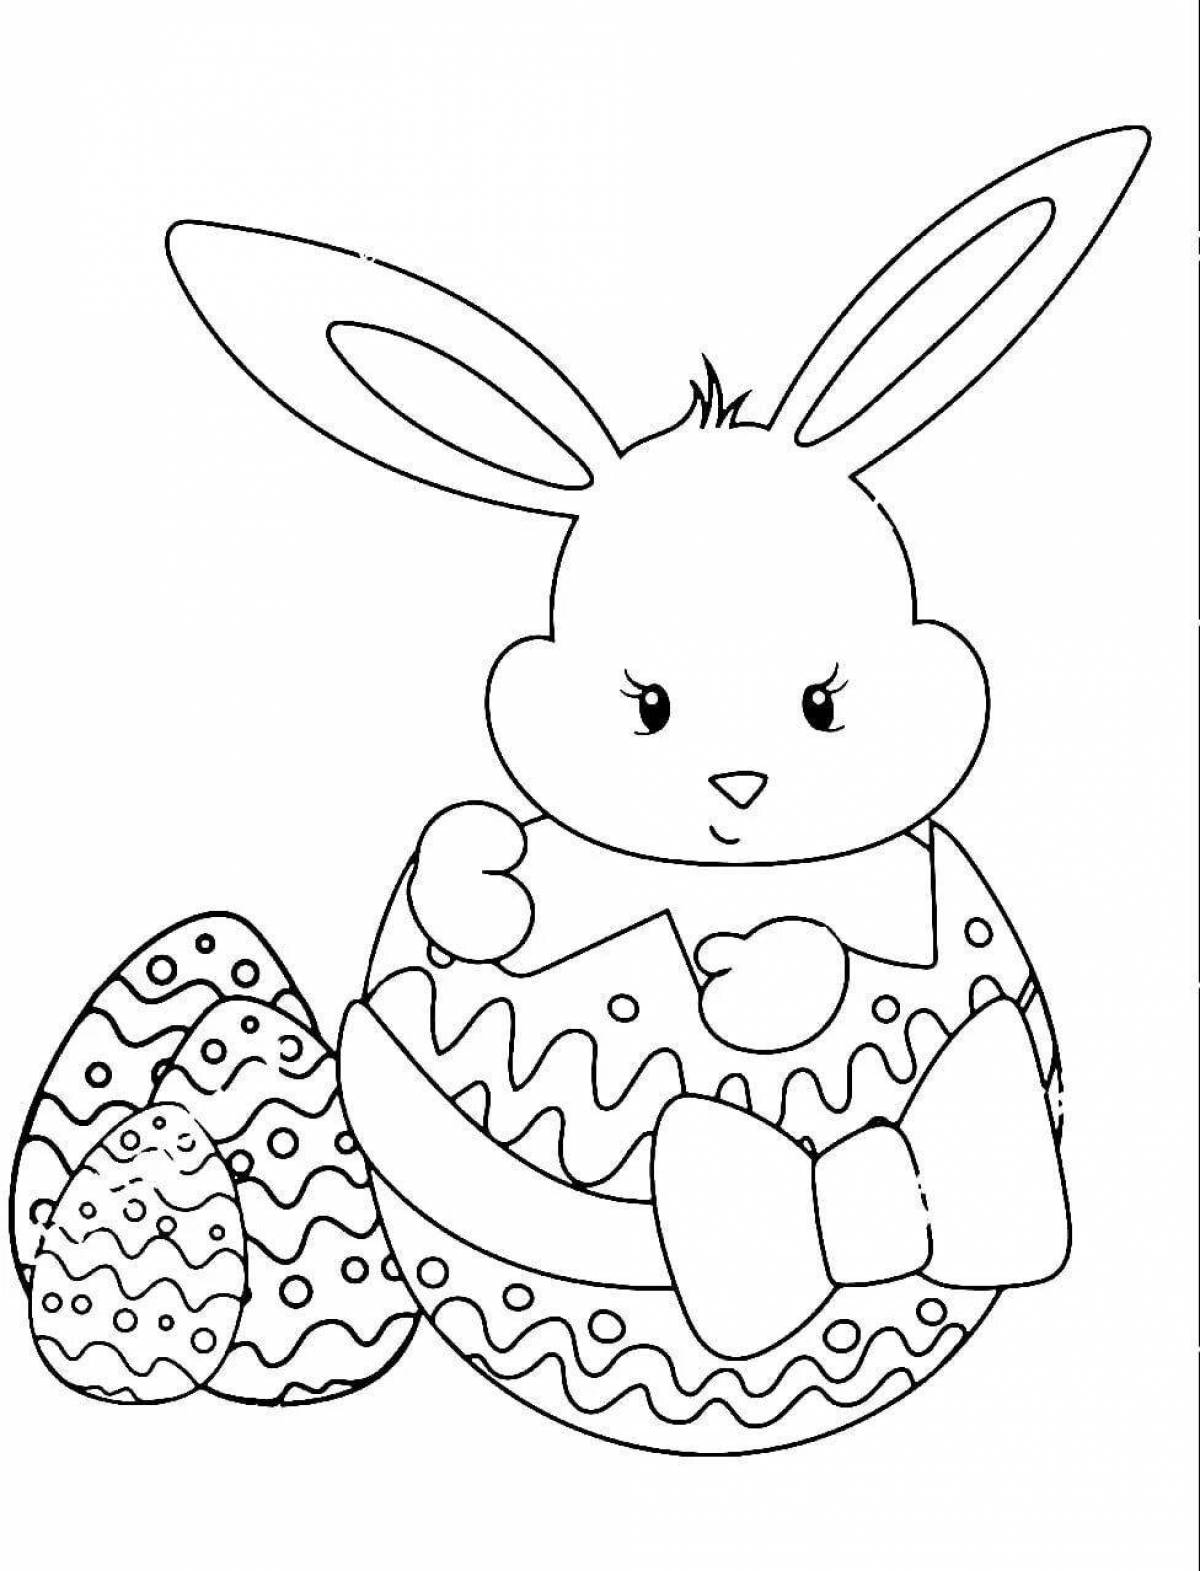 Playful easter bunny coloring book